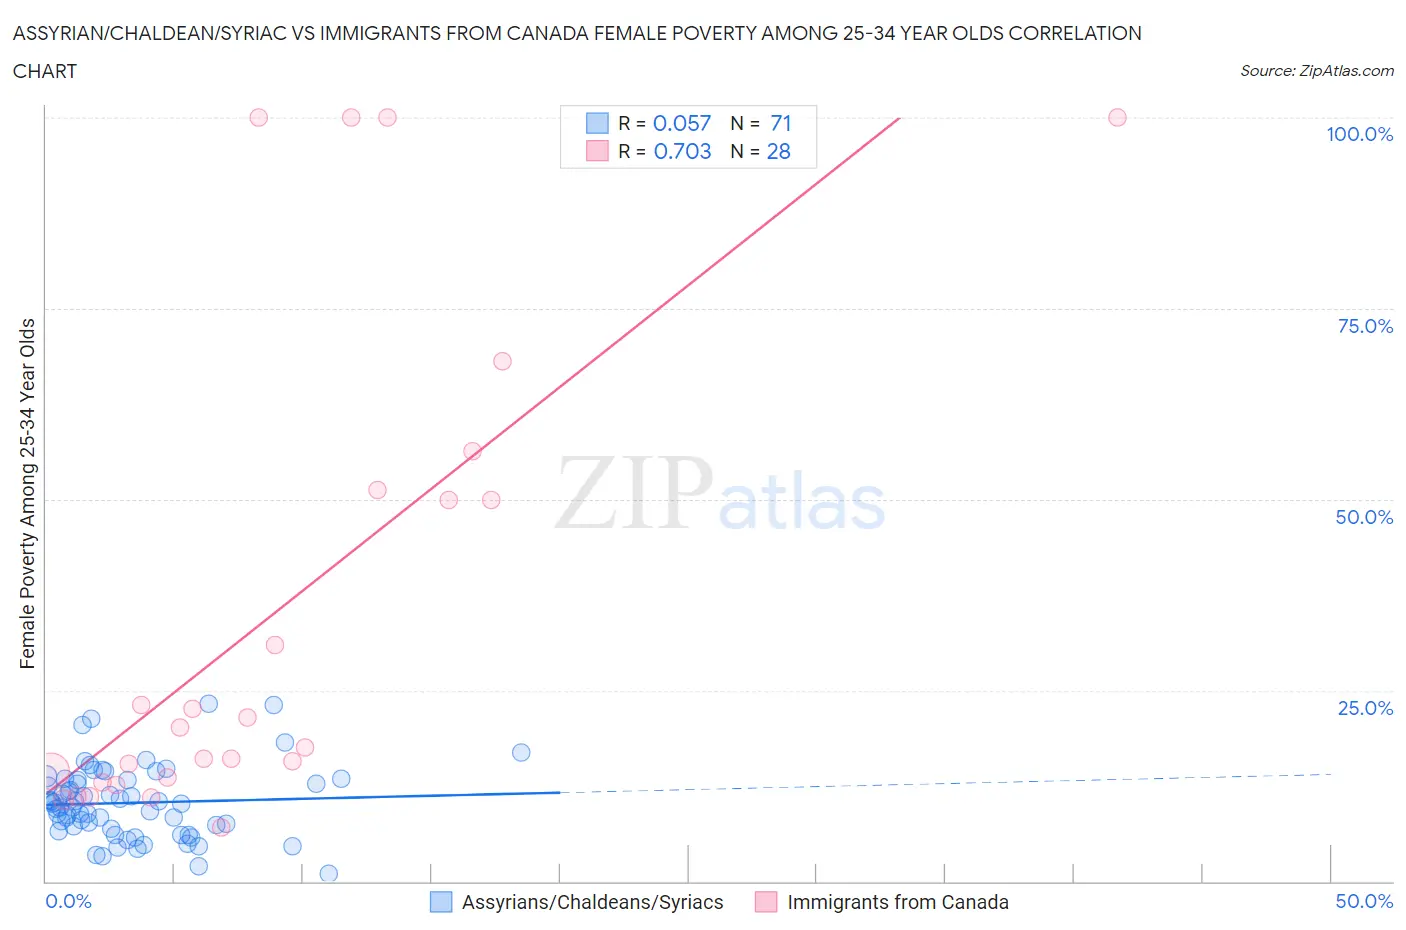 Assyrian/Chaldean/Syriac vs Immigrants from Canada Female Poverty Among 25-34 Year Olds